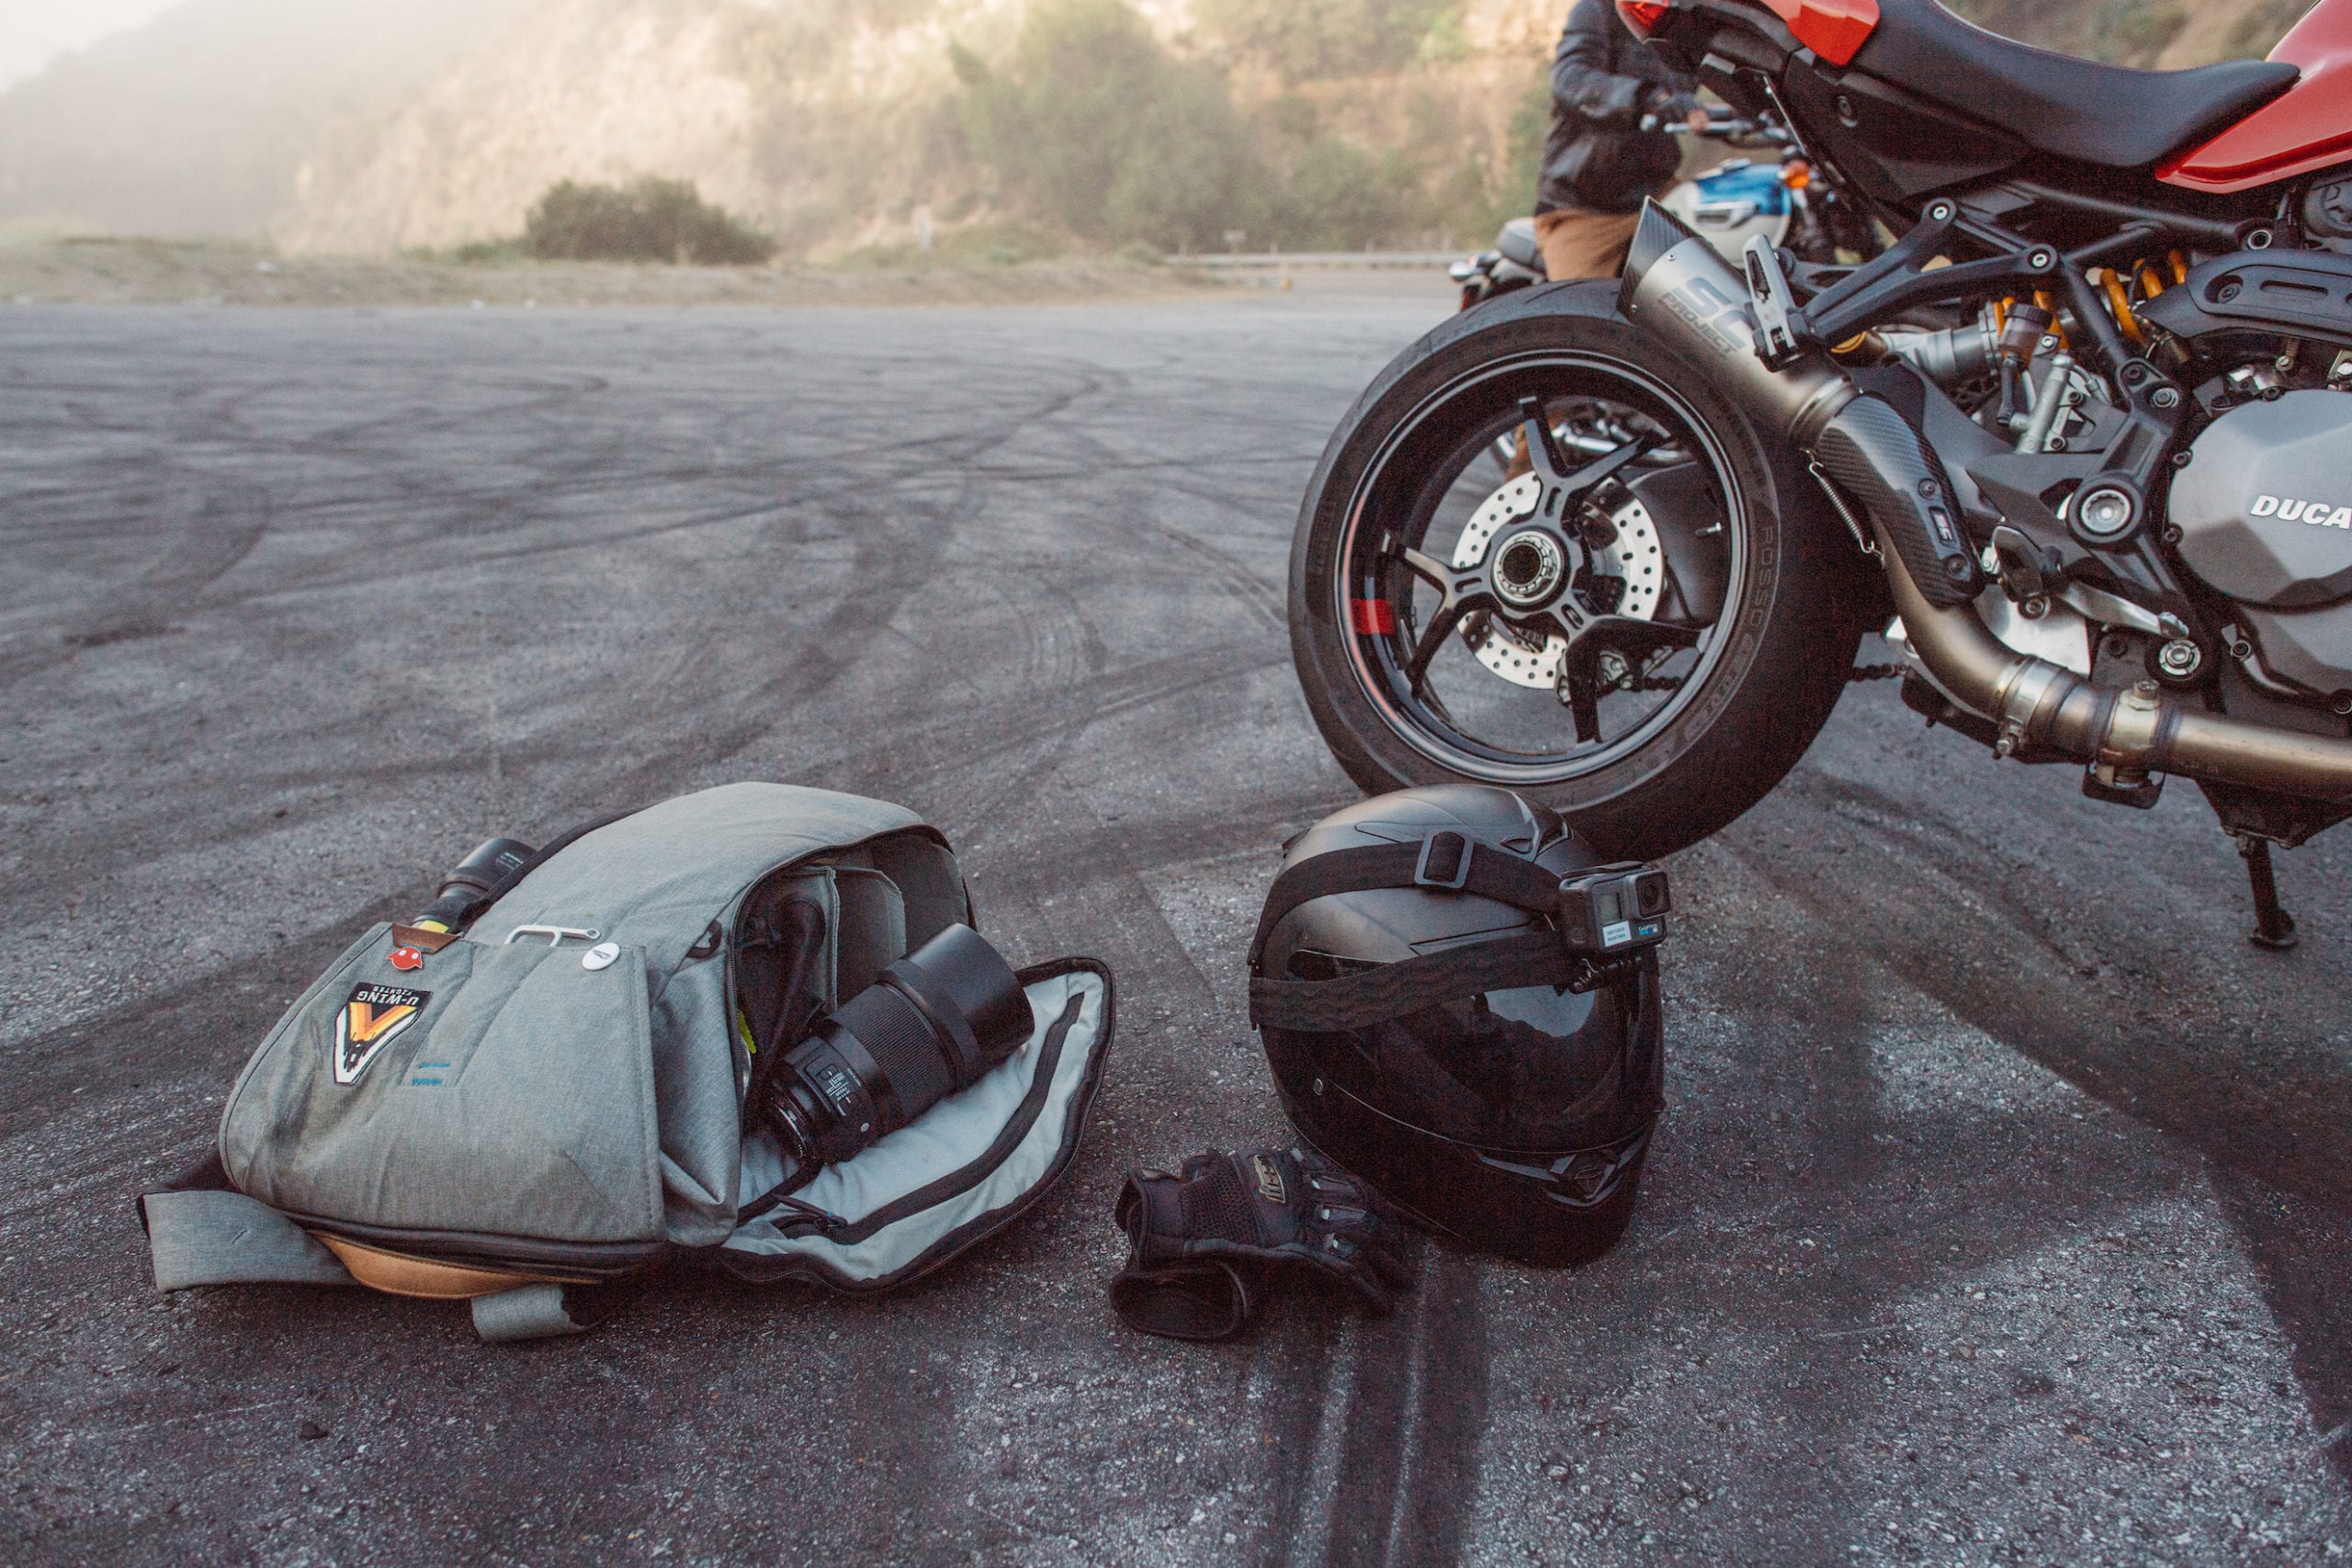 View of the back side of the bike along with helmet with camera, backpack and leather gloves on the ground